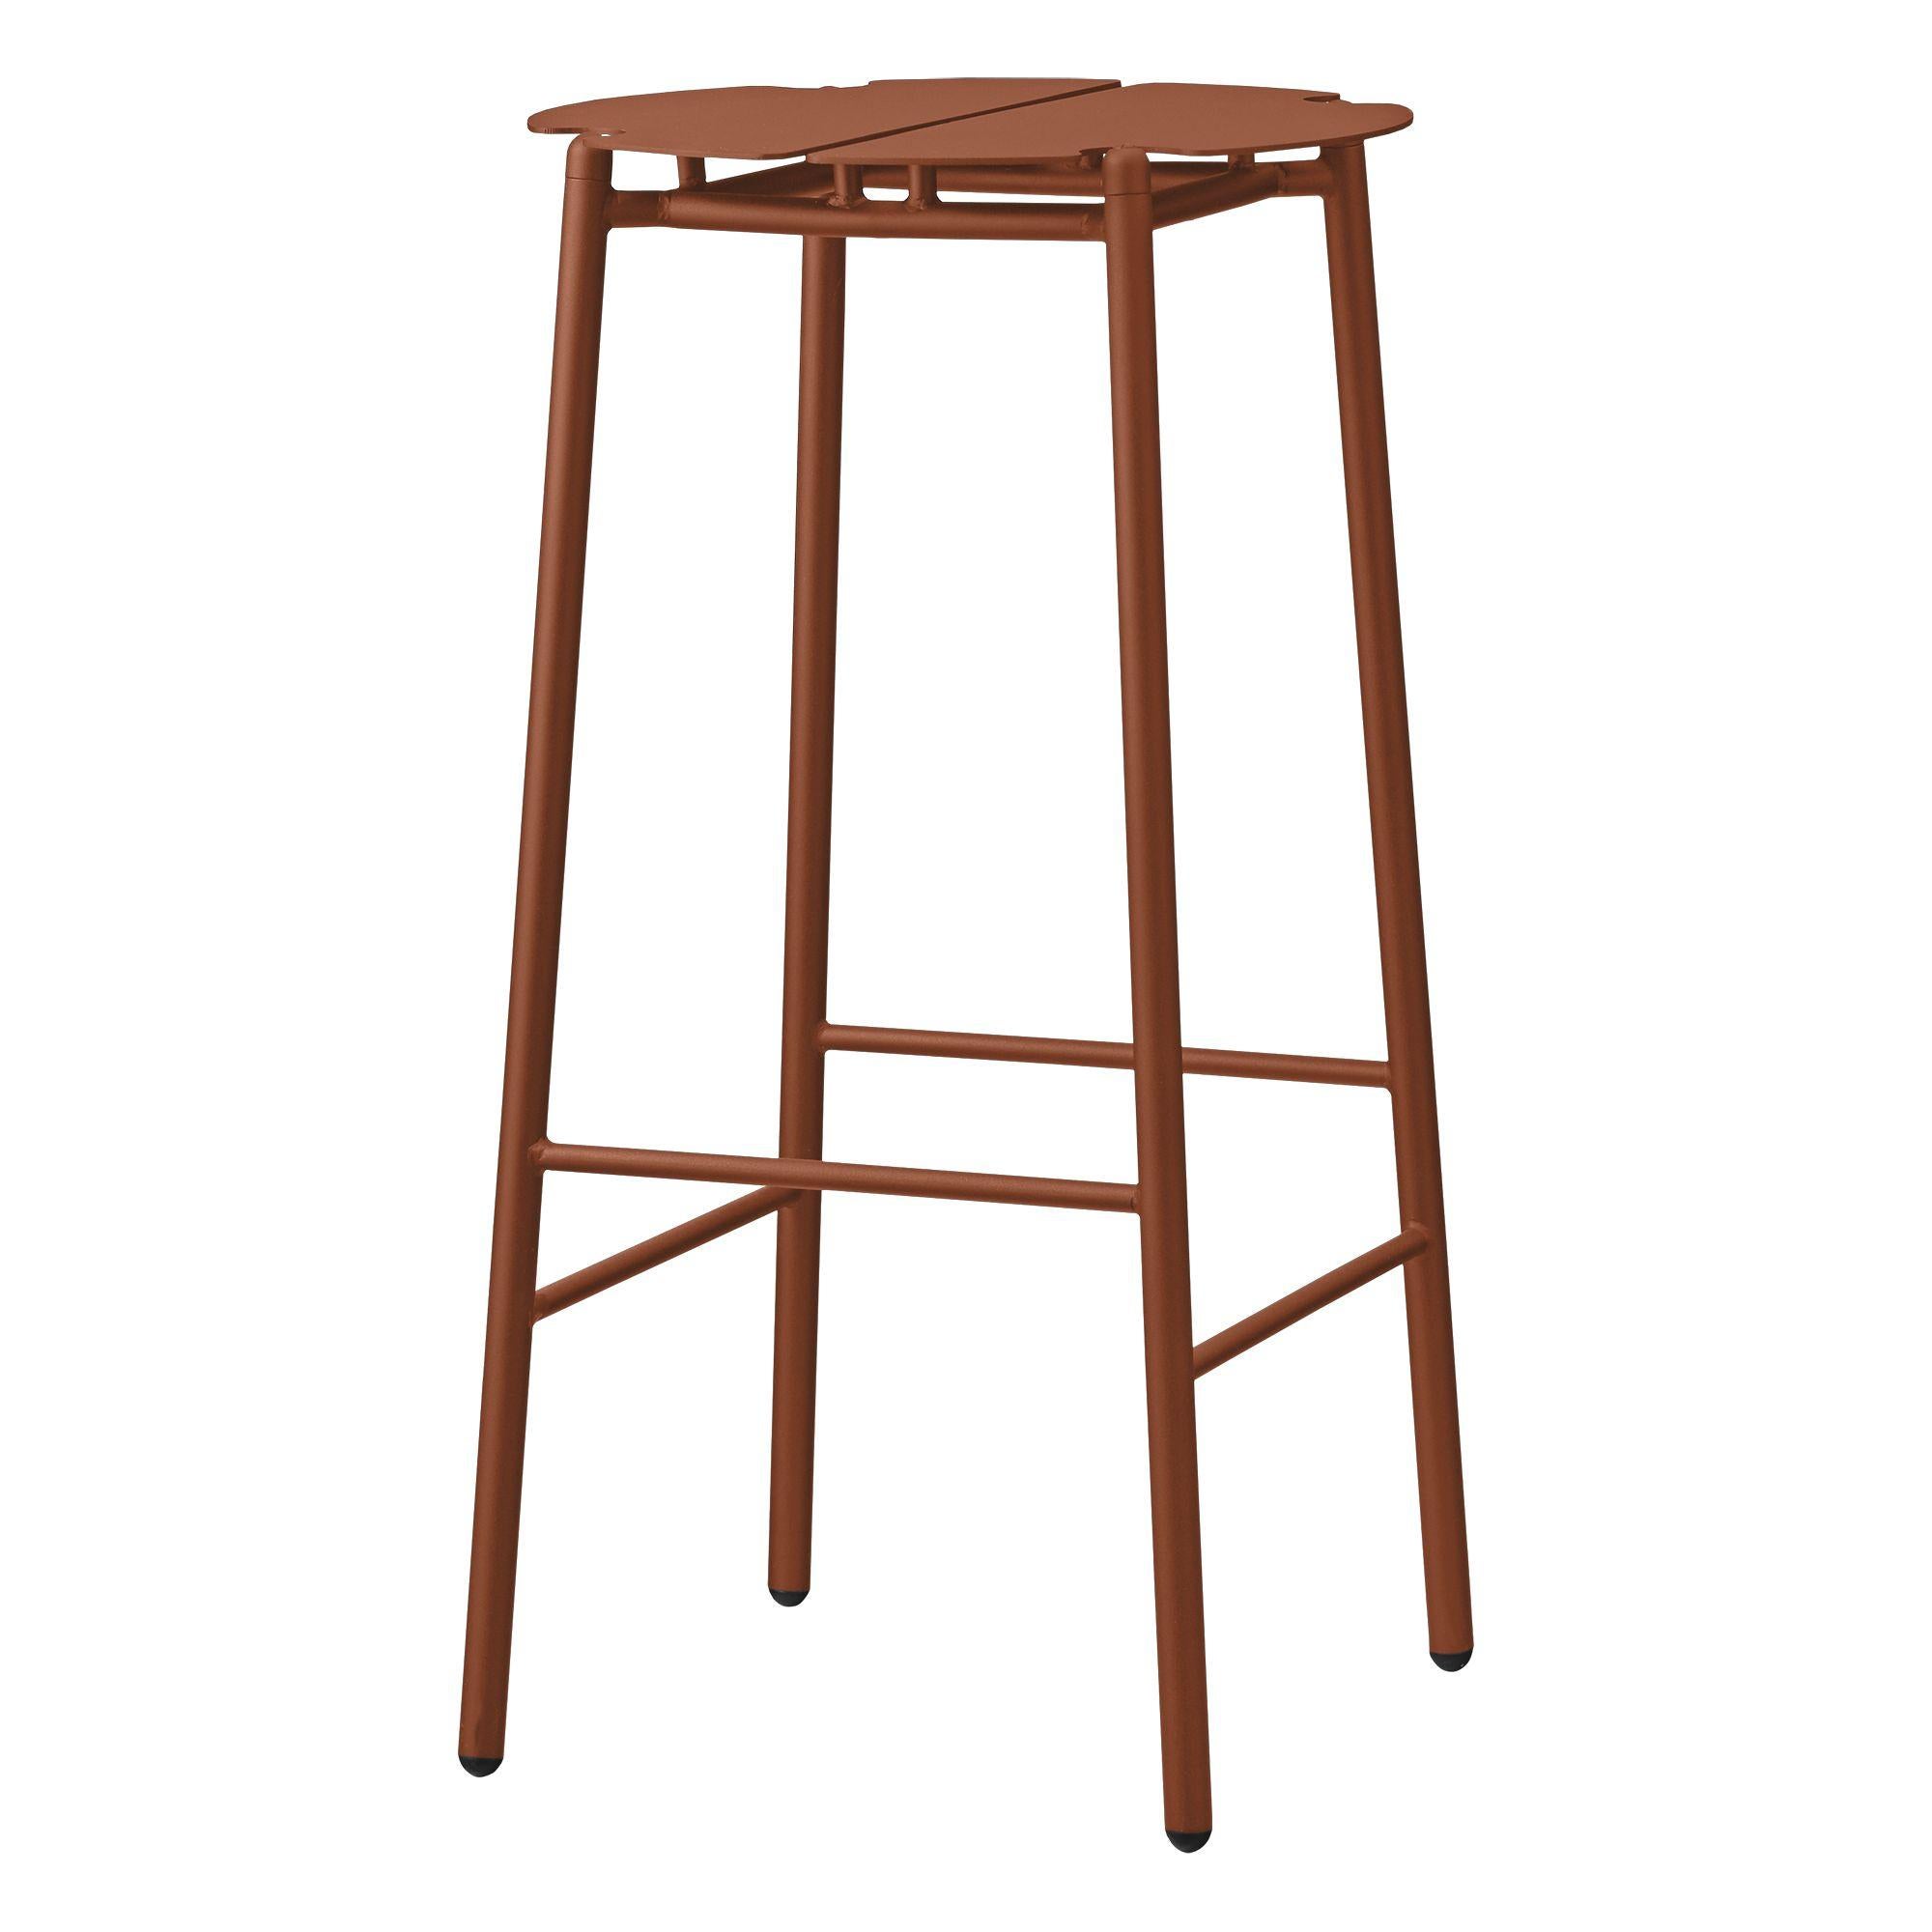 Ginger bread minimalist bar stool
Dimensions: Diameter 38 x Height 75 cm 
Materials: Steel w. Matte powder coating & aluminum w. Matte powder coating.
Available in colors: Taupe, bordeaux, forest, ginger bread, black and, black and